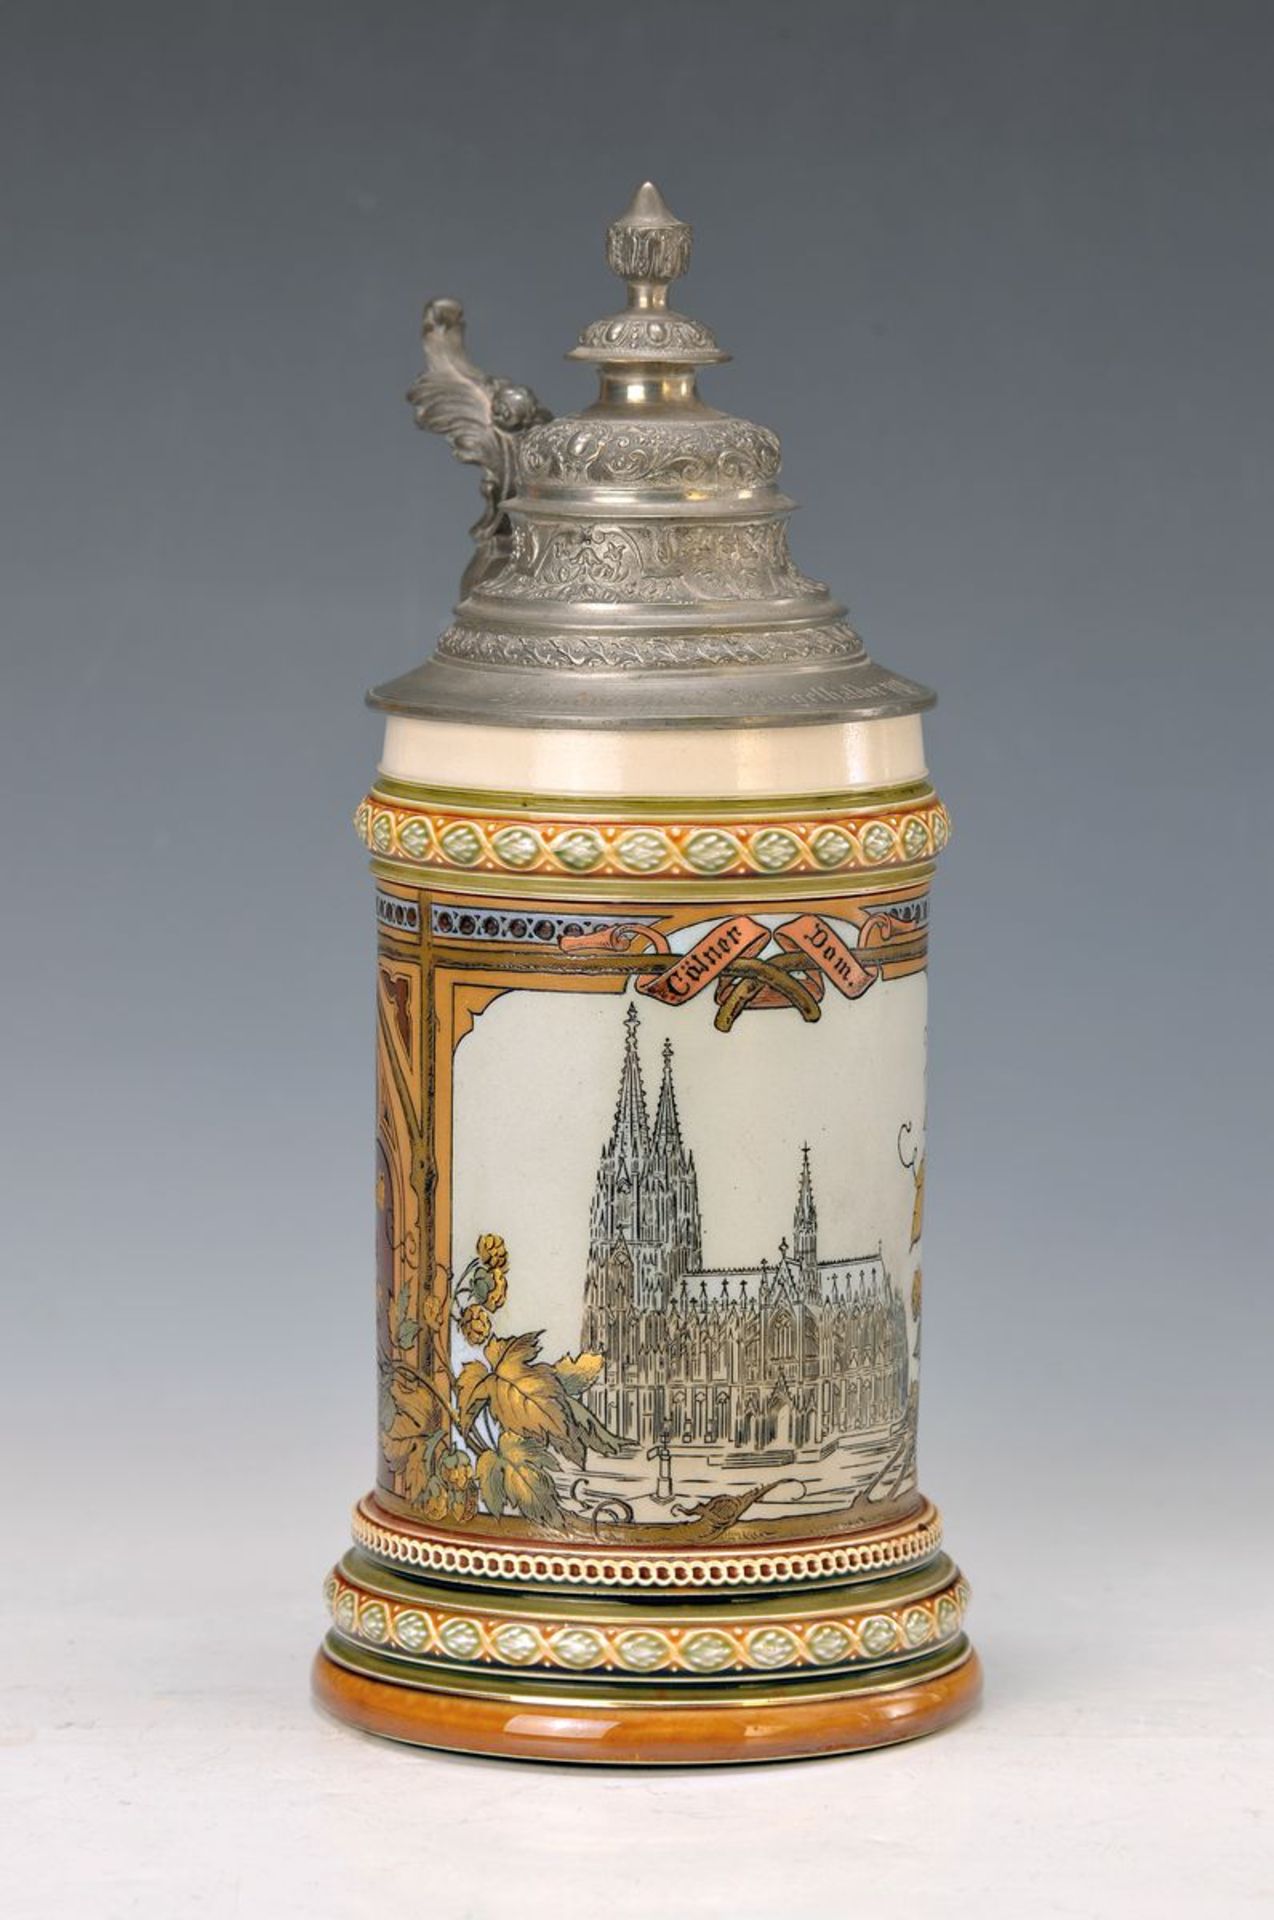 tin lid jar, Mettlach, Model 1915, around 1890, tin cover dat. and with dedication, representation